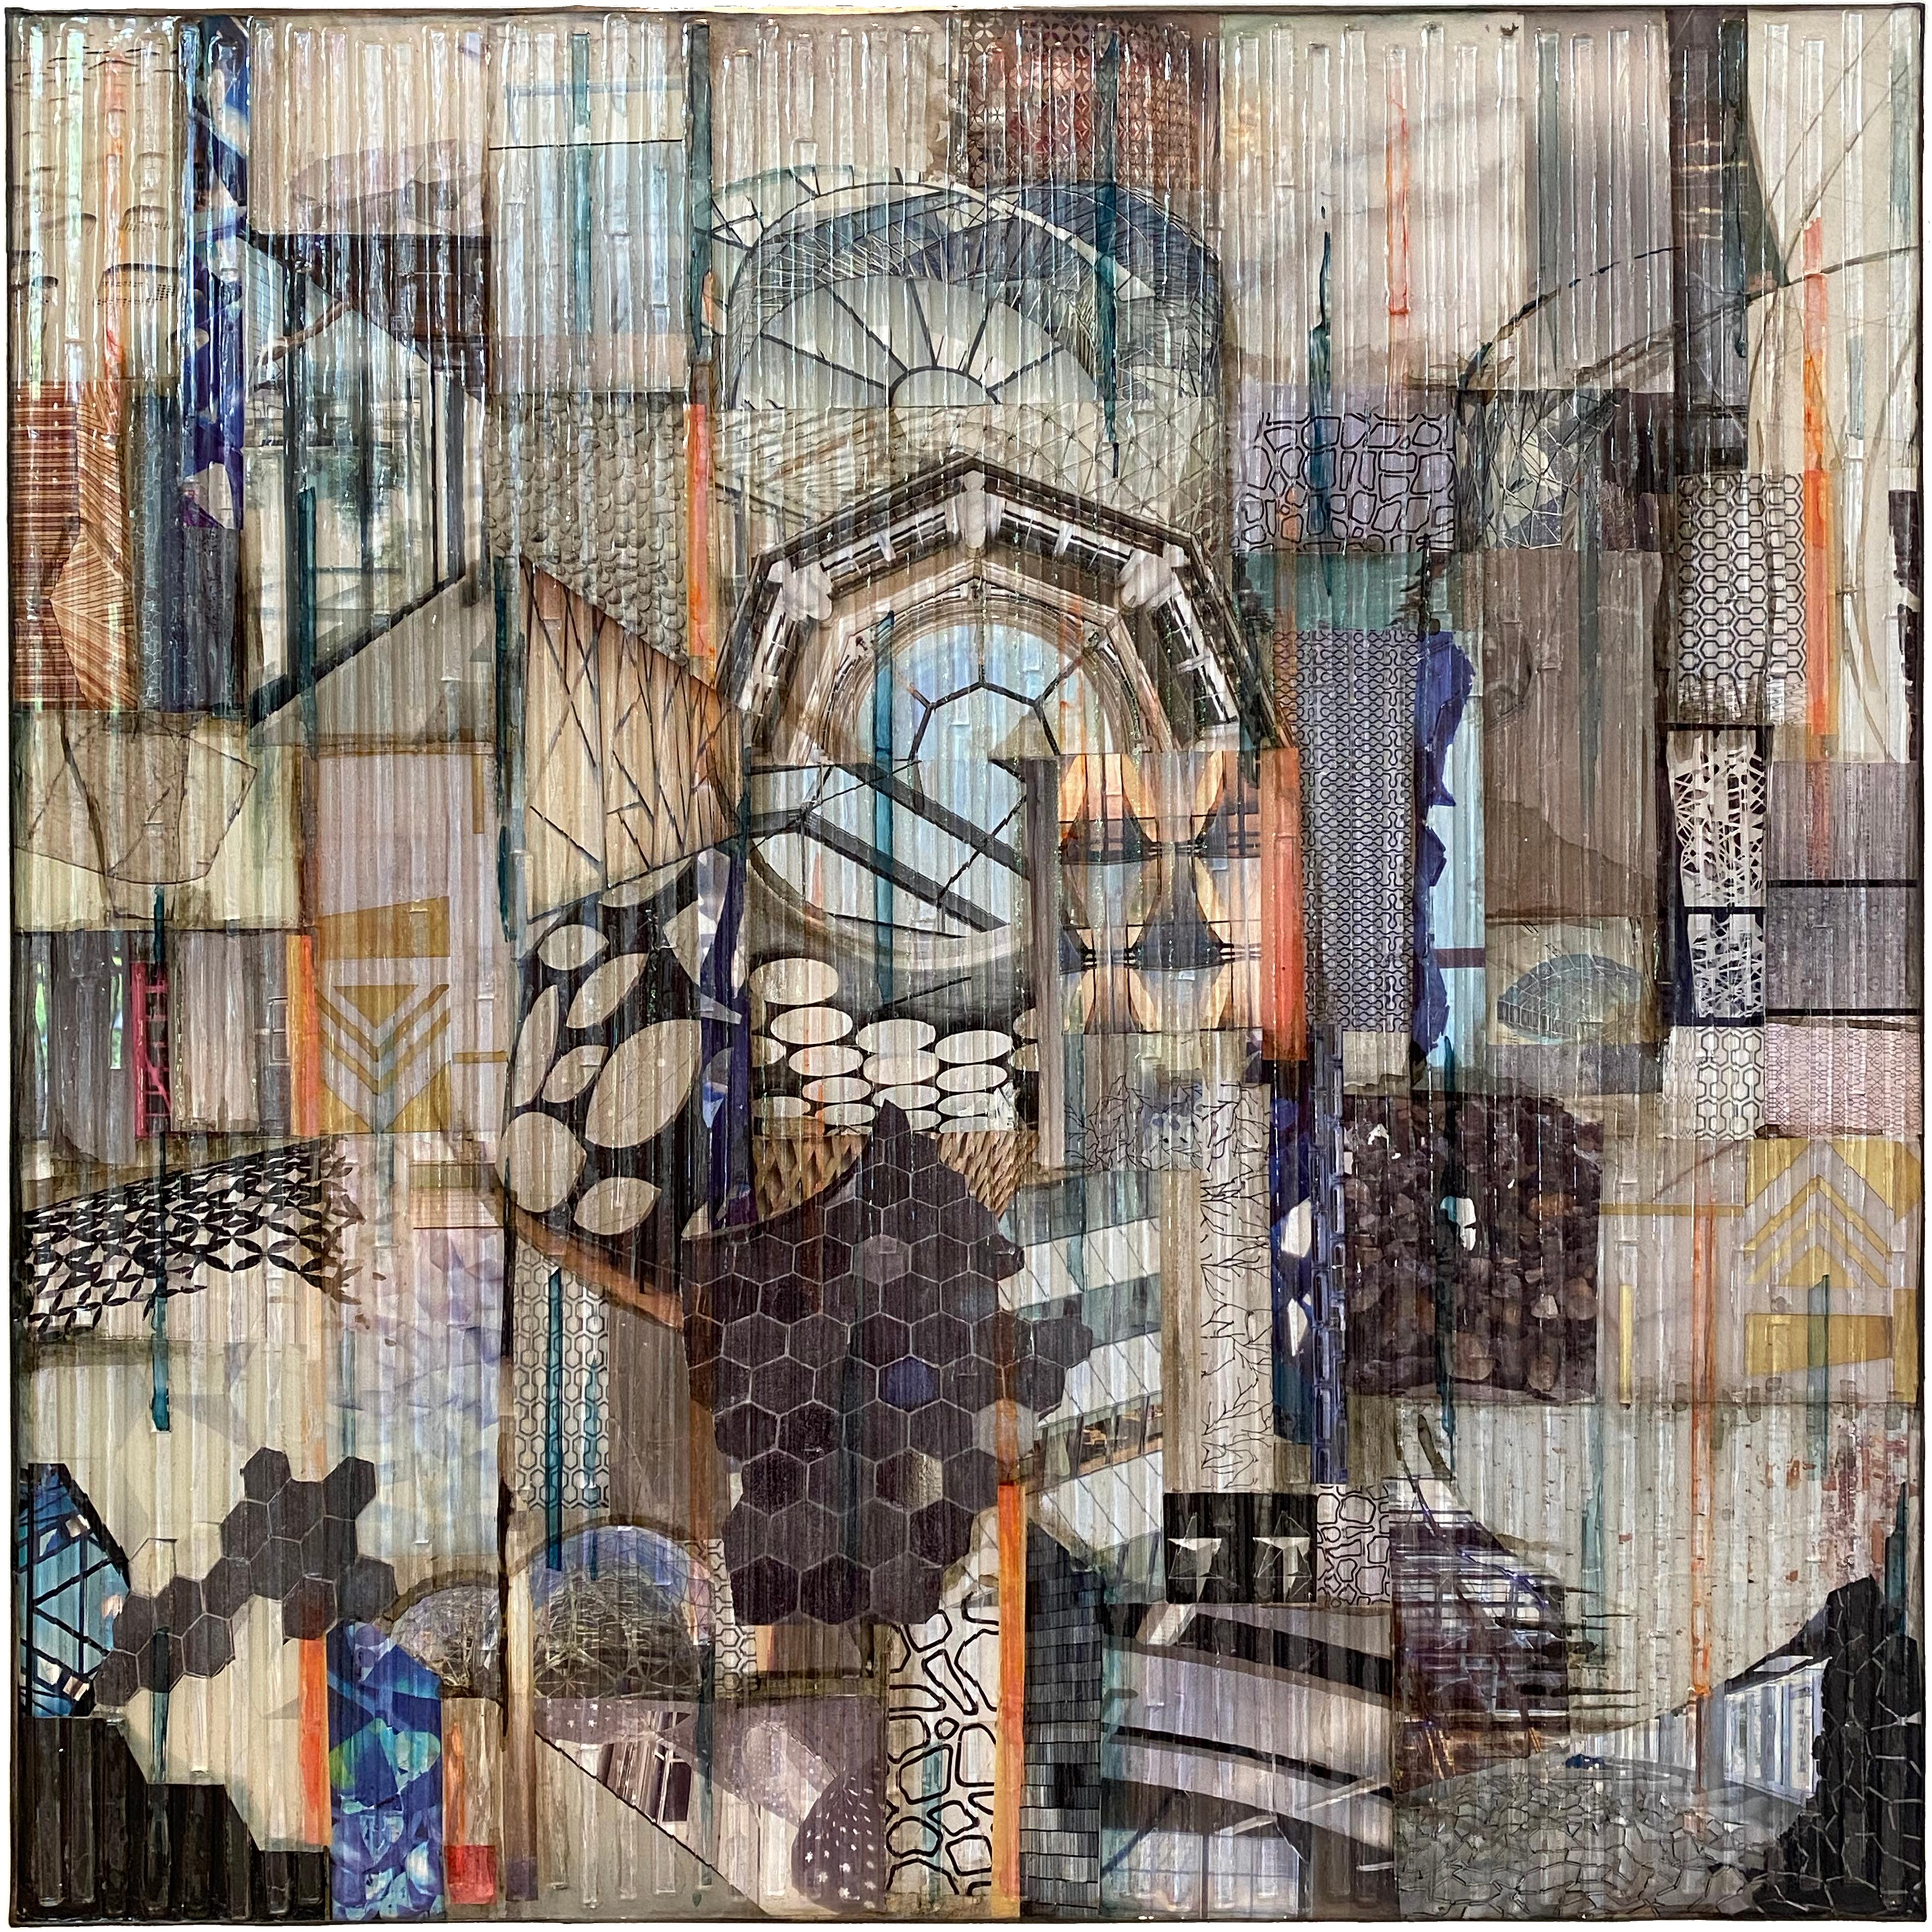 'Code & Form' Mixed Media Glass, Paint, Collage on Wood Panel Diptych - Contemporary Mixed Media Art by Madonna Phillips